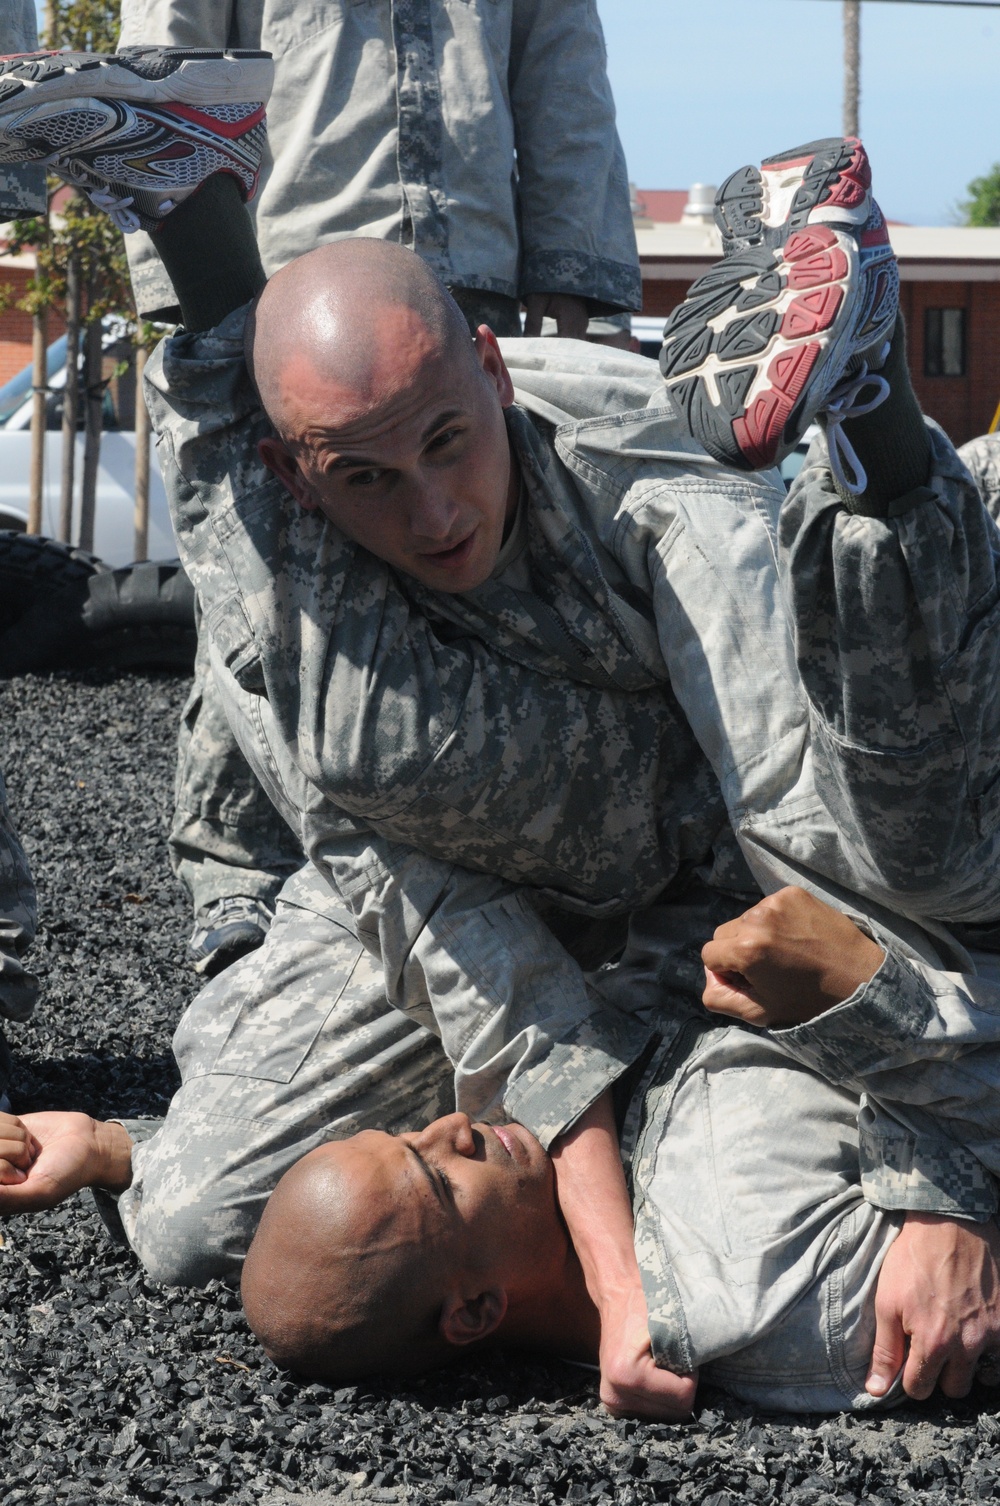 Going the extra mile, 311th soldiers step up in Best Warrior